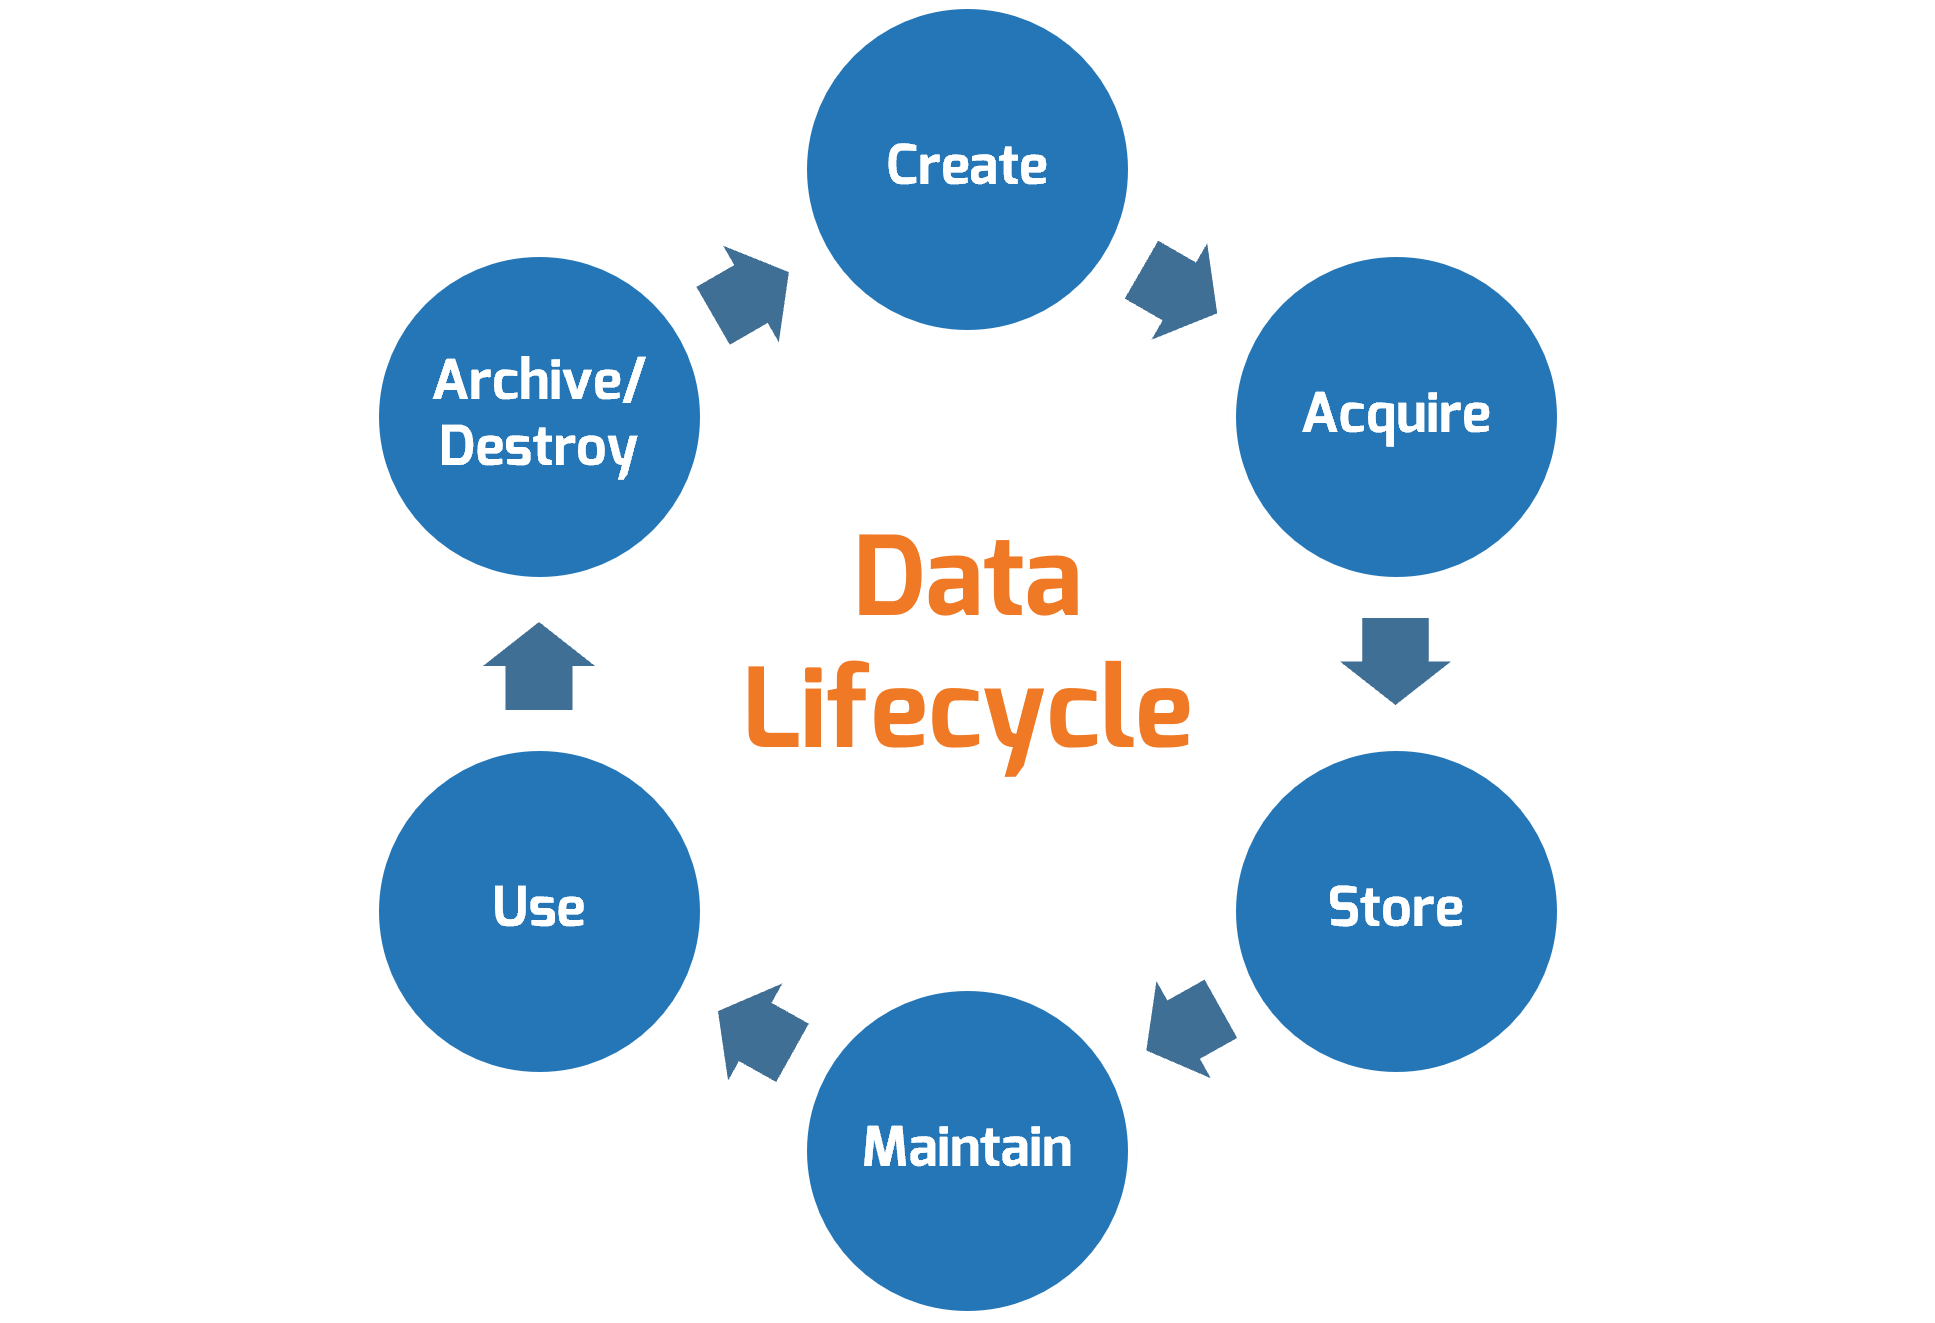 'Data Lifecycle' with steps 'Create', 'Acquire', 'Store', 'Maintain', 'Use', and 'Archive/Destroy'.